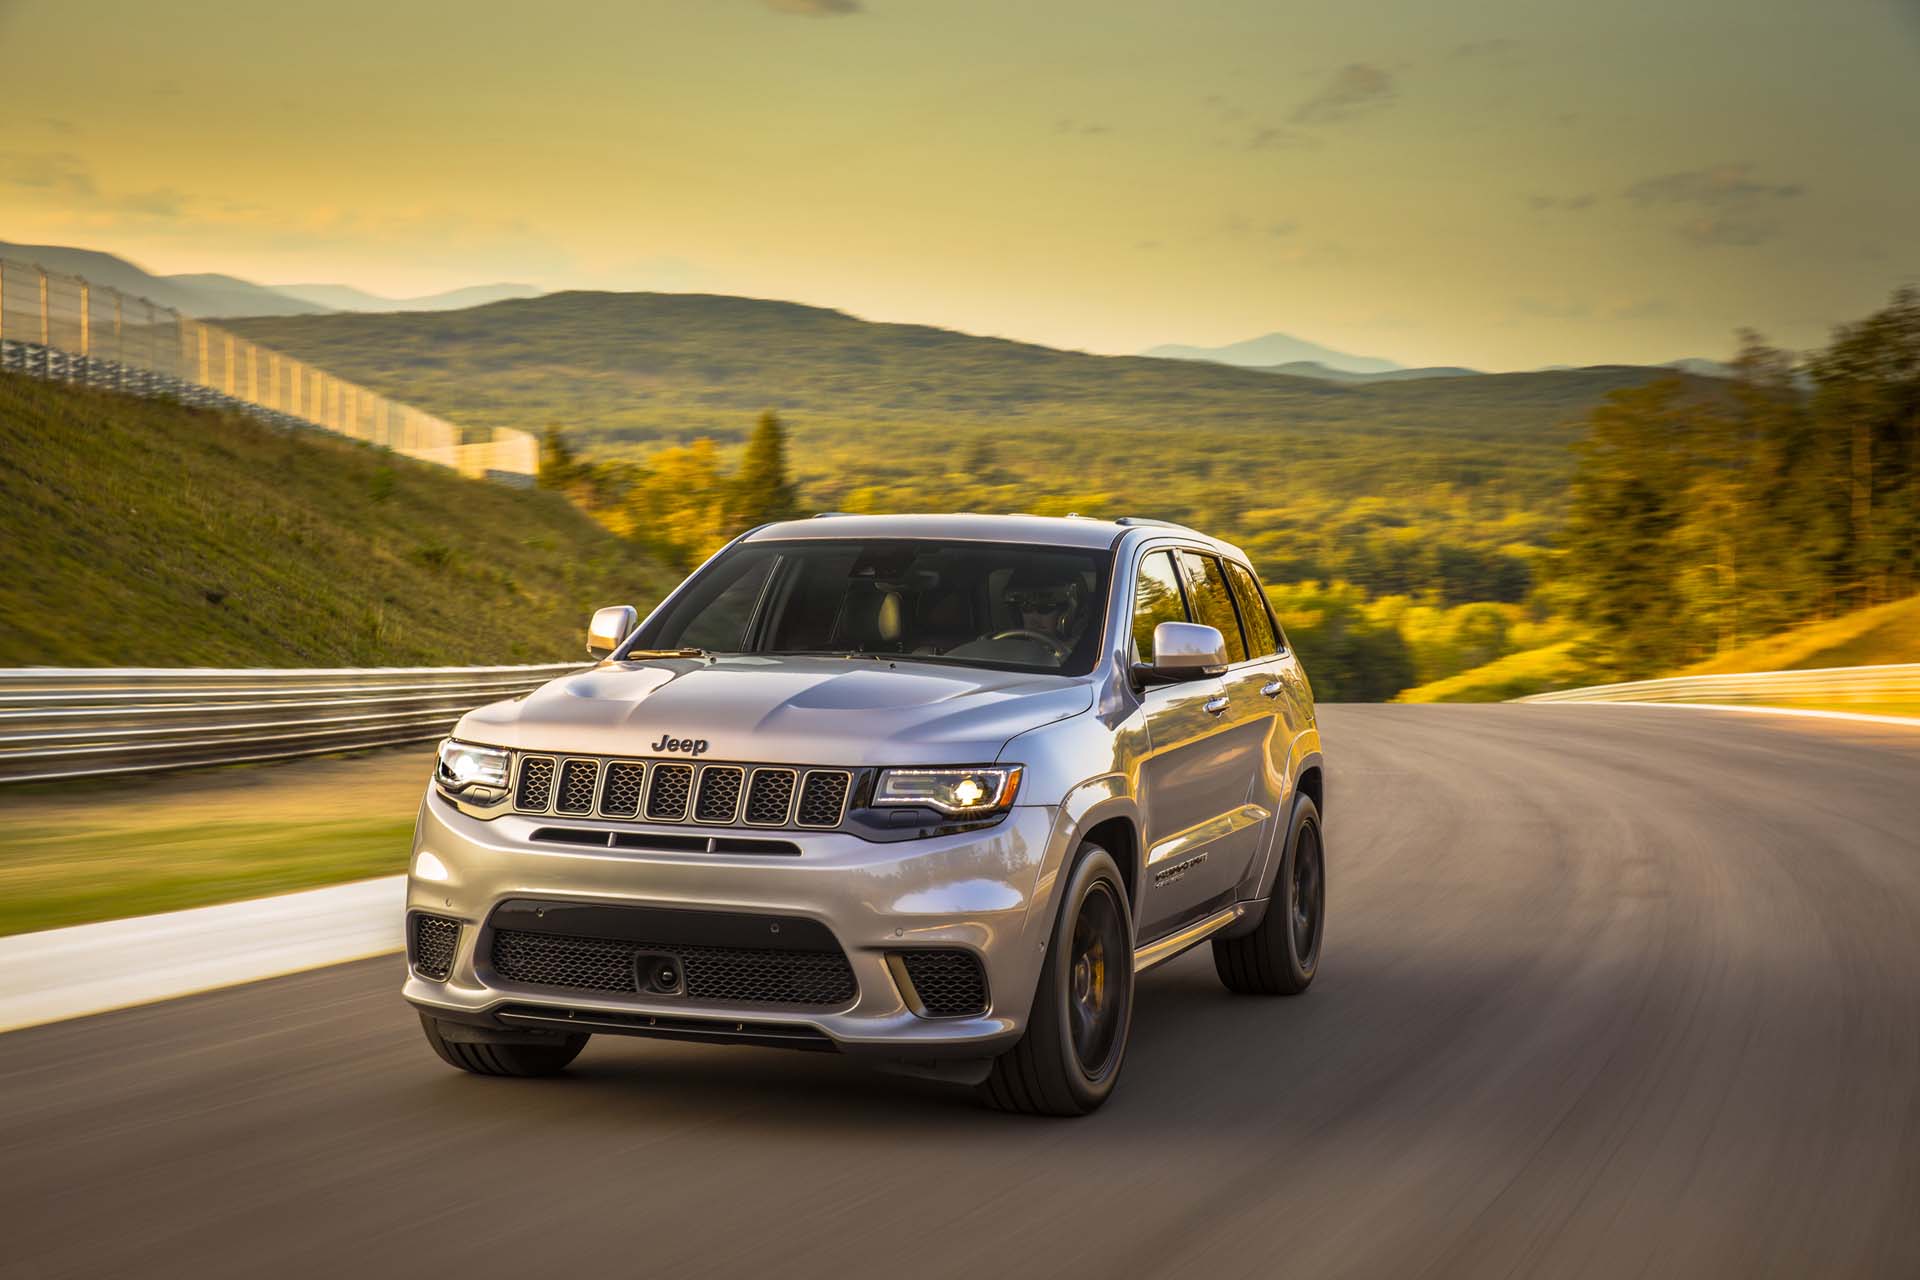 Xtreme Performance trademark may hint at branding for future sporty Jeeps Auto Recent